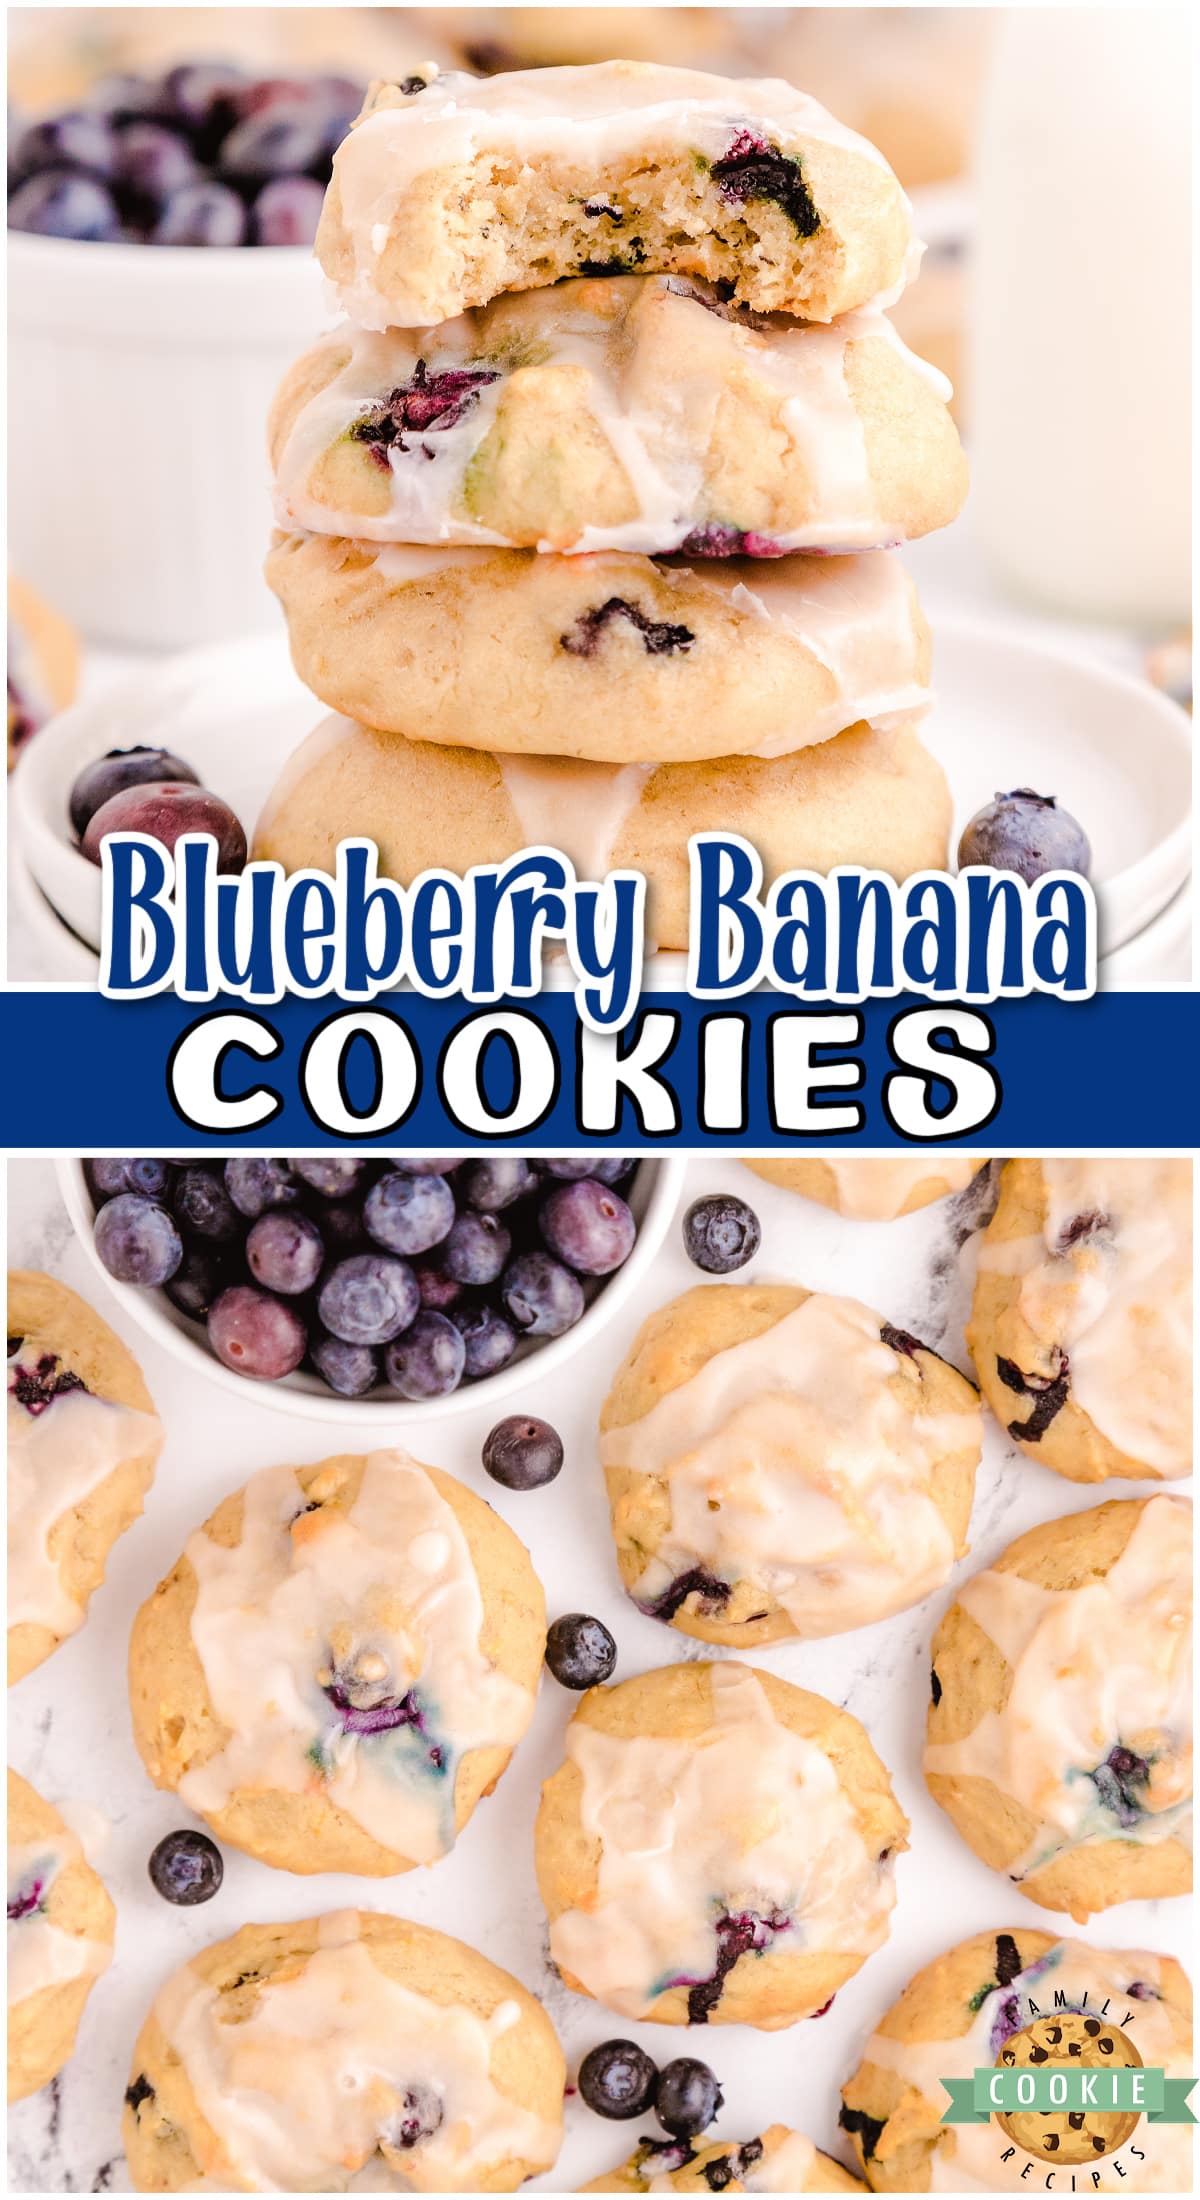 Blueberry Banana Cookies are like blueberry muffin tops but in cookie form! Great blueberries banana flavor, with melt-in-your-mouth texture!